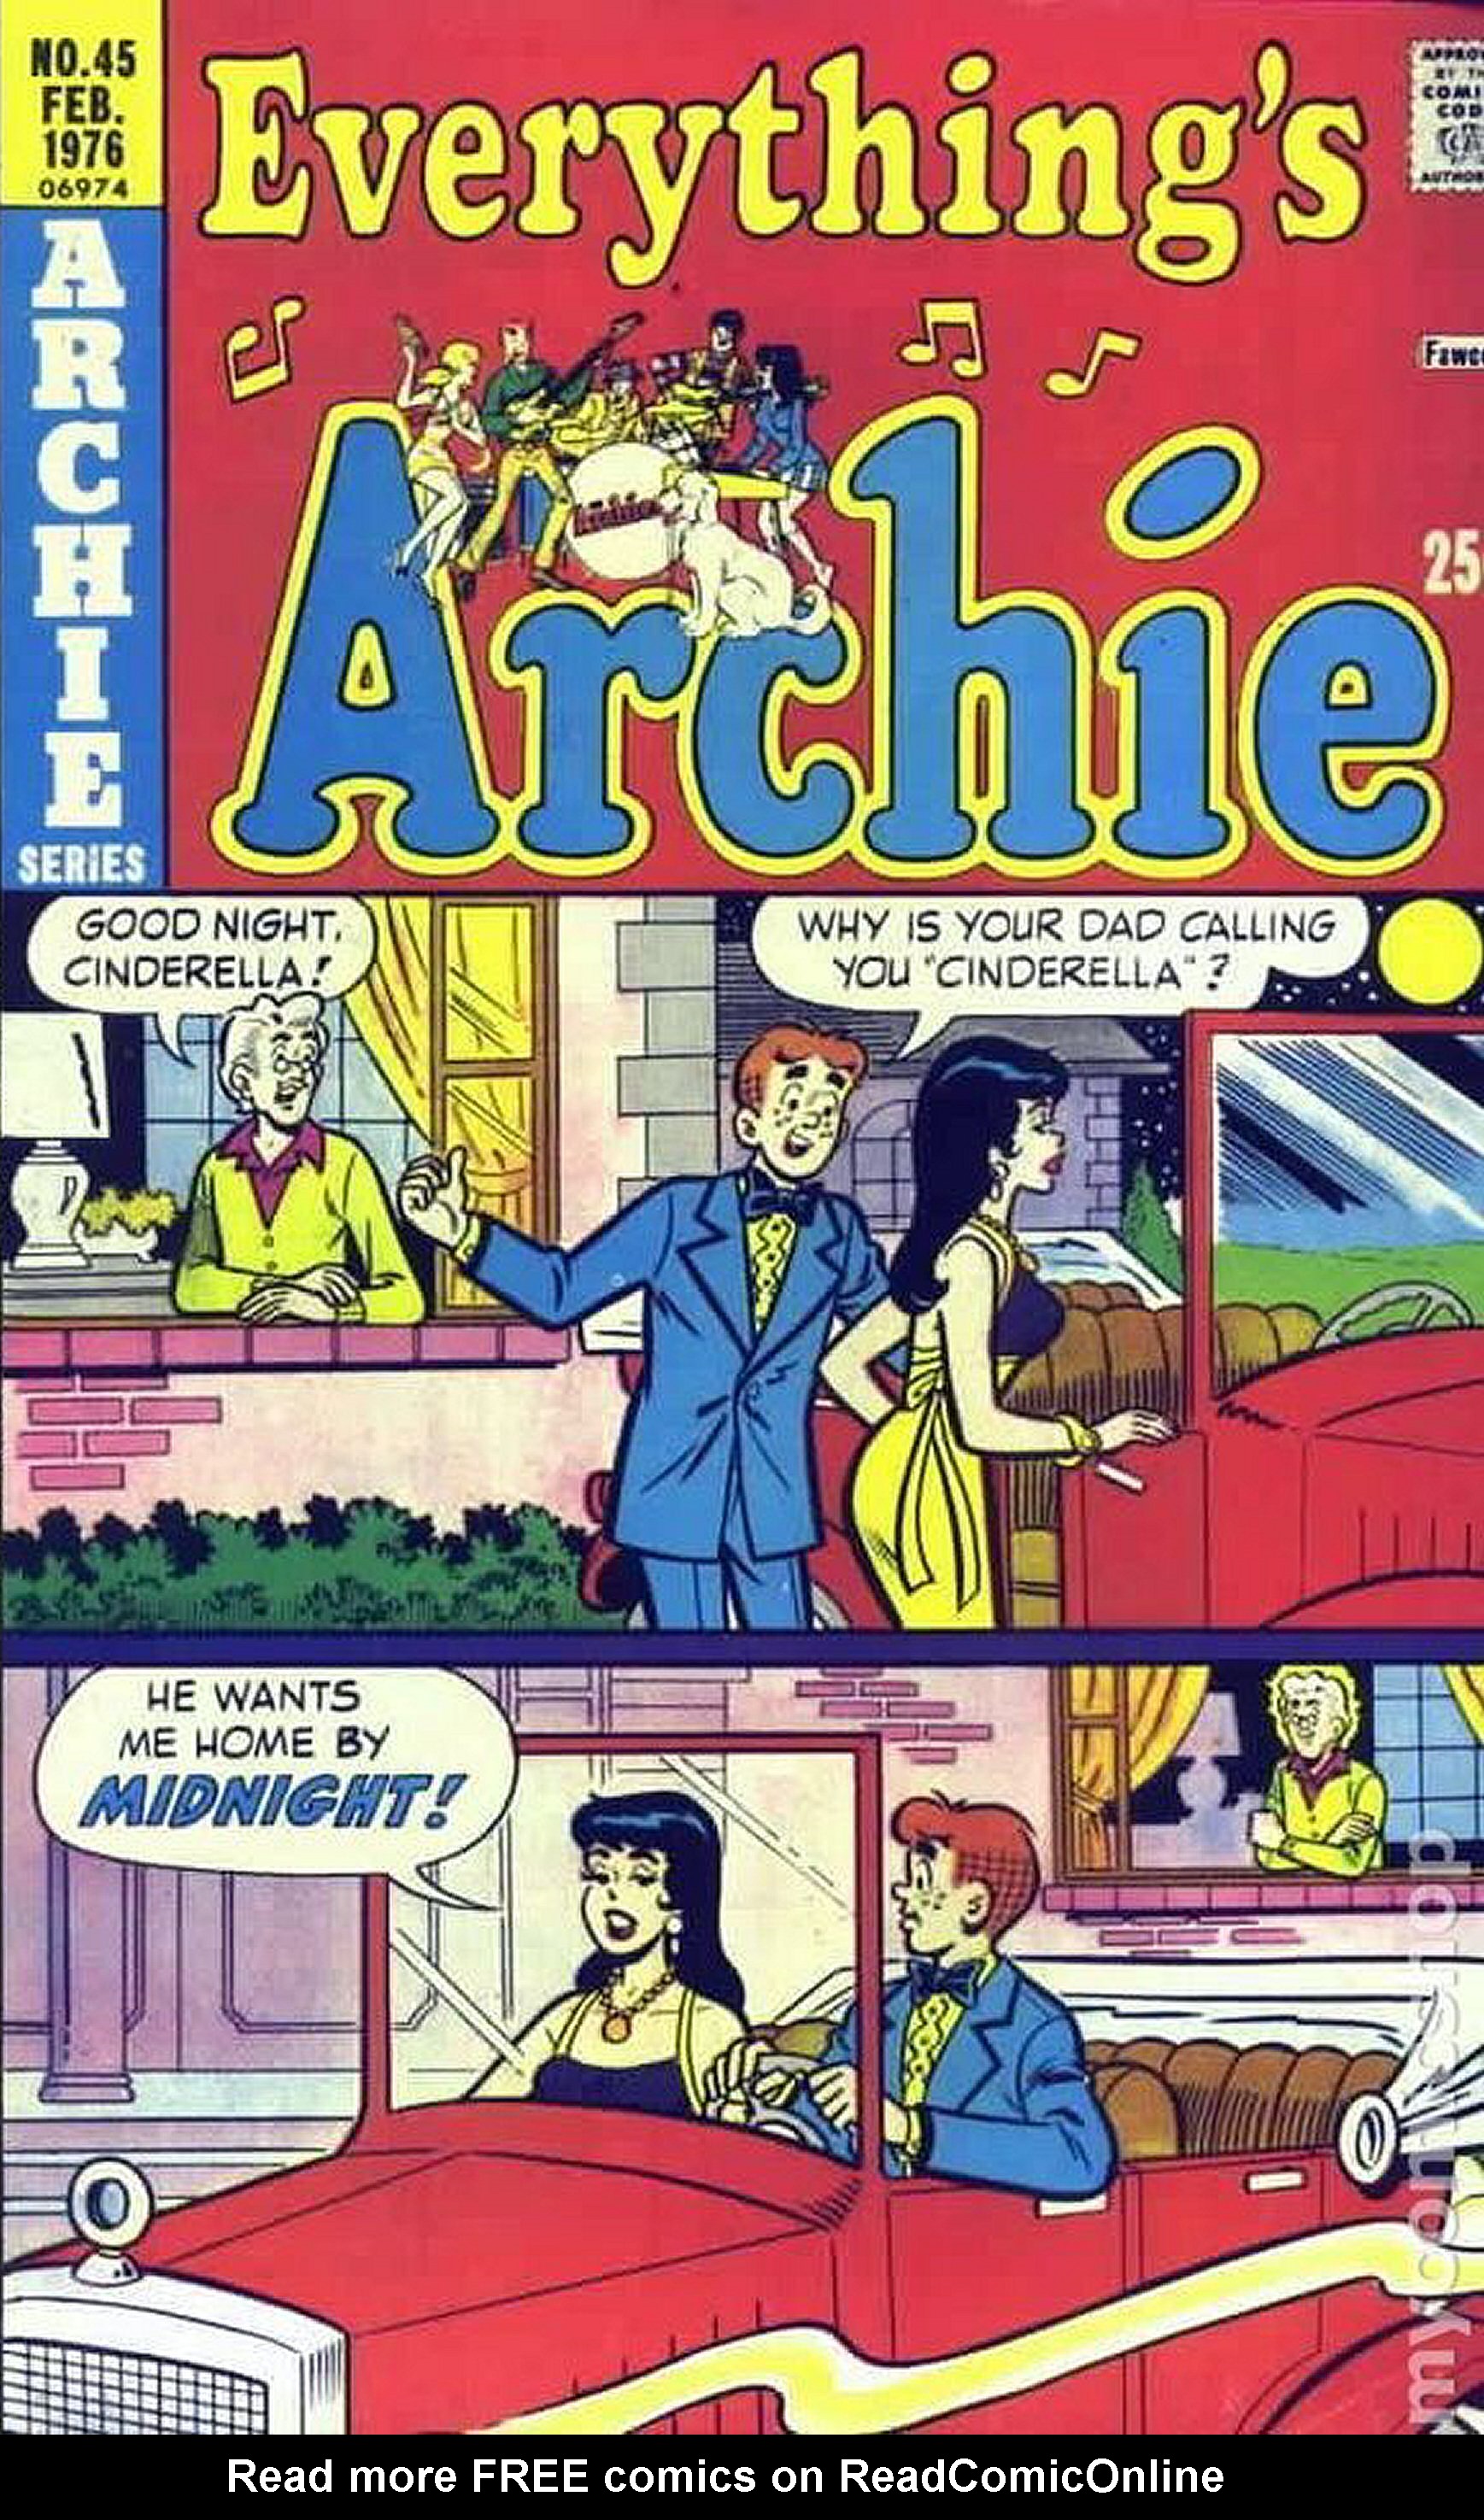 Read online Everything's Archie comic -  Issue #45 - 1